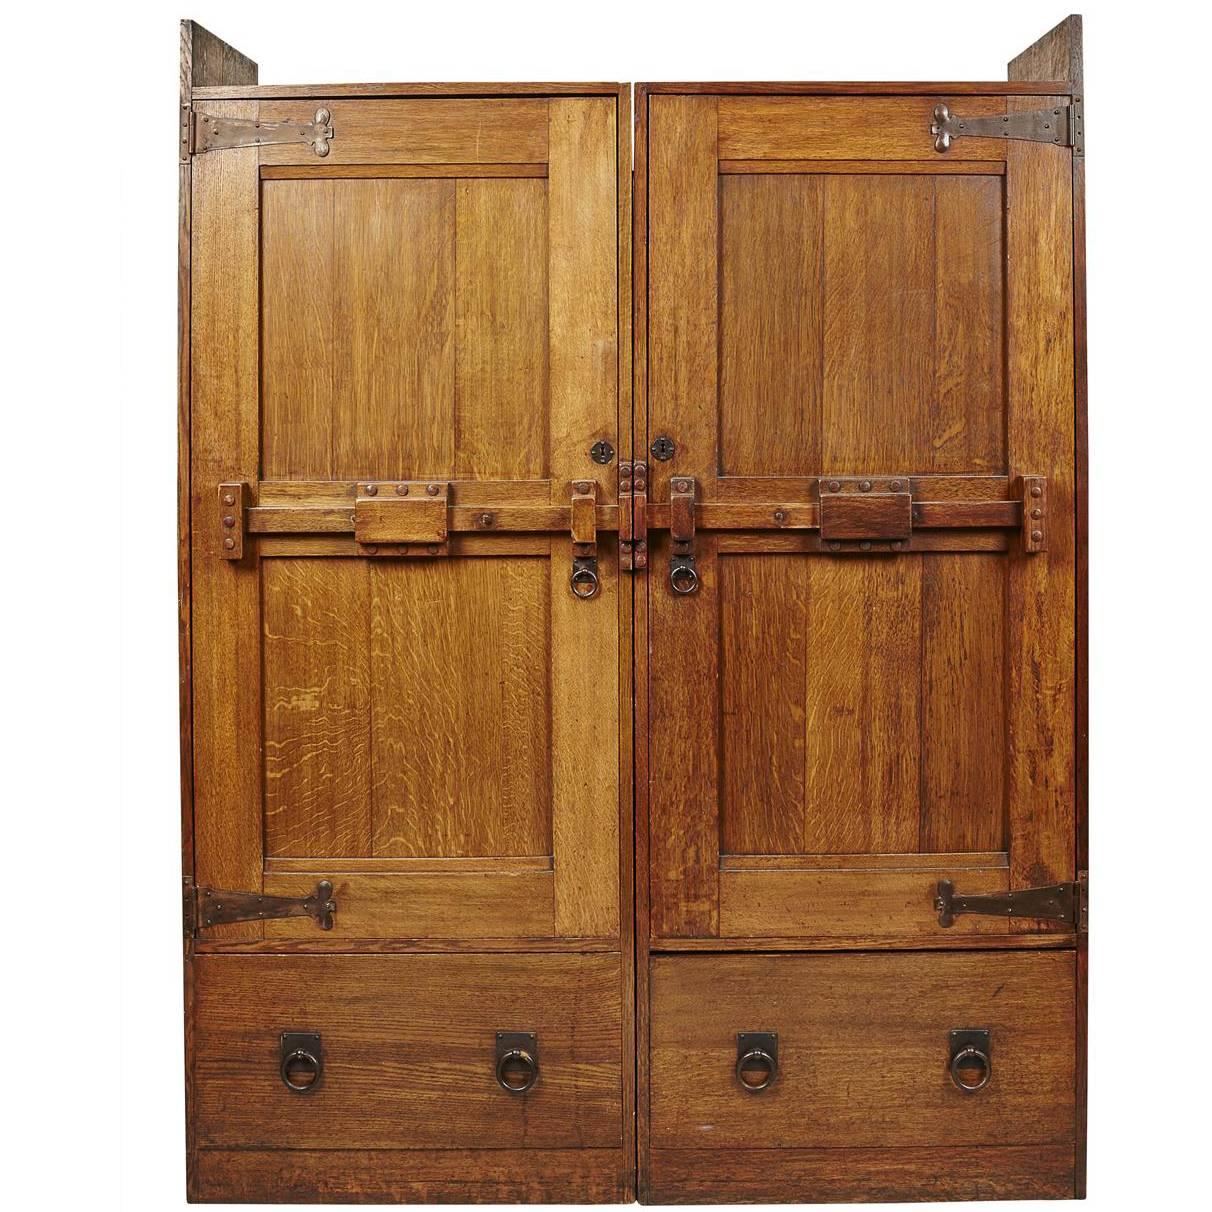 Wylie & Lochhead. A Large Arts & Crafts Oak Wardrobe With Stylised Iron Hinges